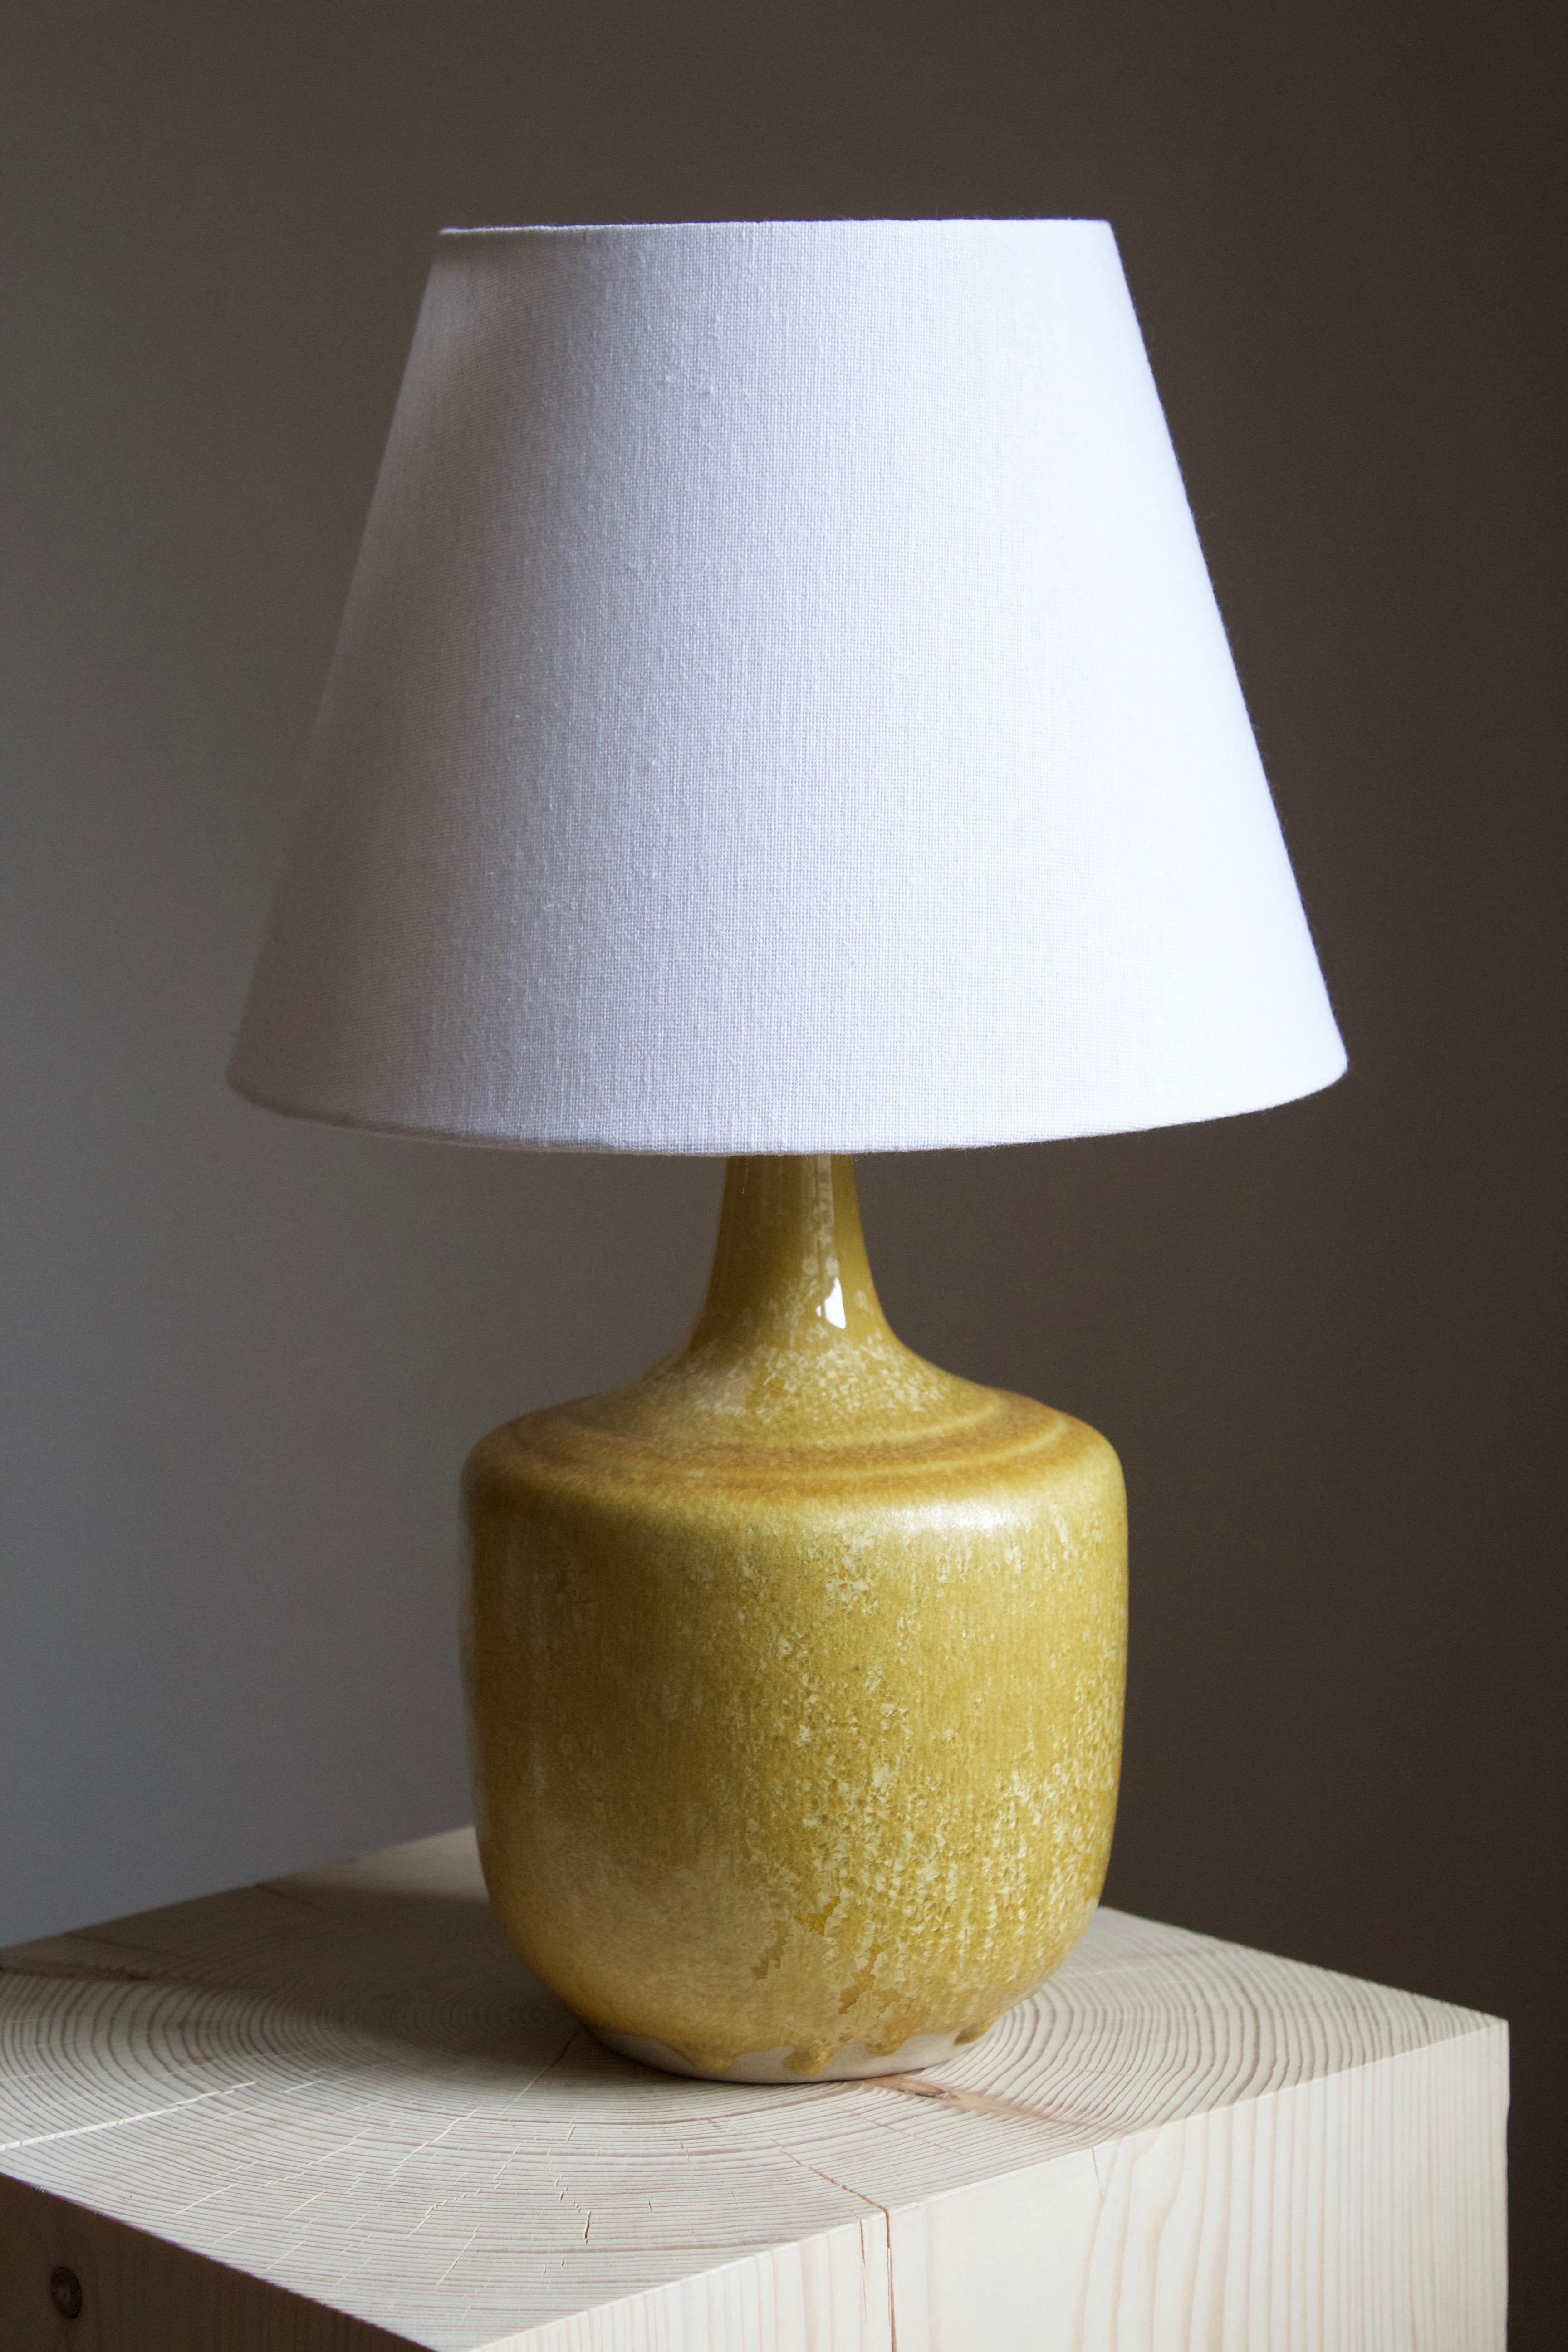 A table lamp, by Henning Nilsson. In highly artistic yellow glazed stoneware. Signed and dated 1988.

Sold without lampshade. Stated dimensions exclude the lampshade. Sold without lampshade.